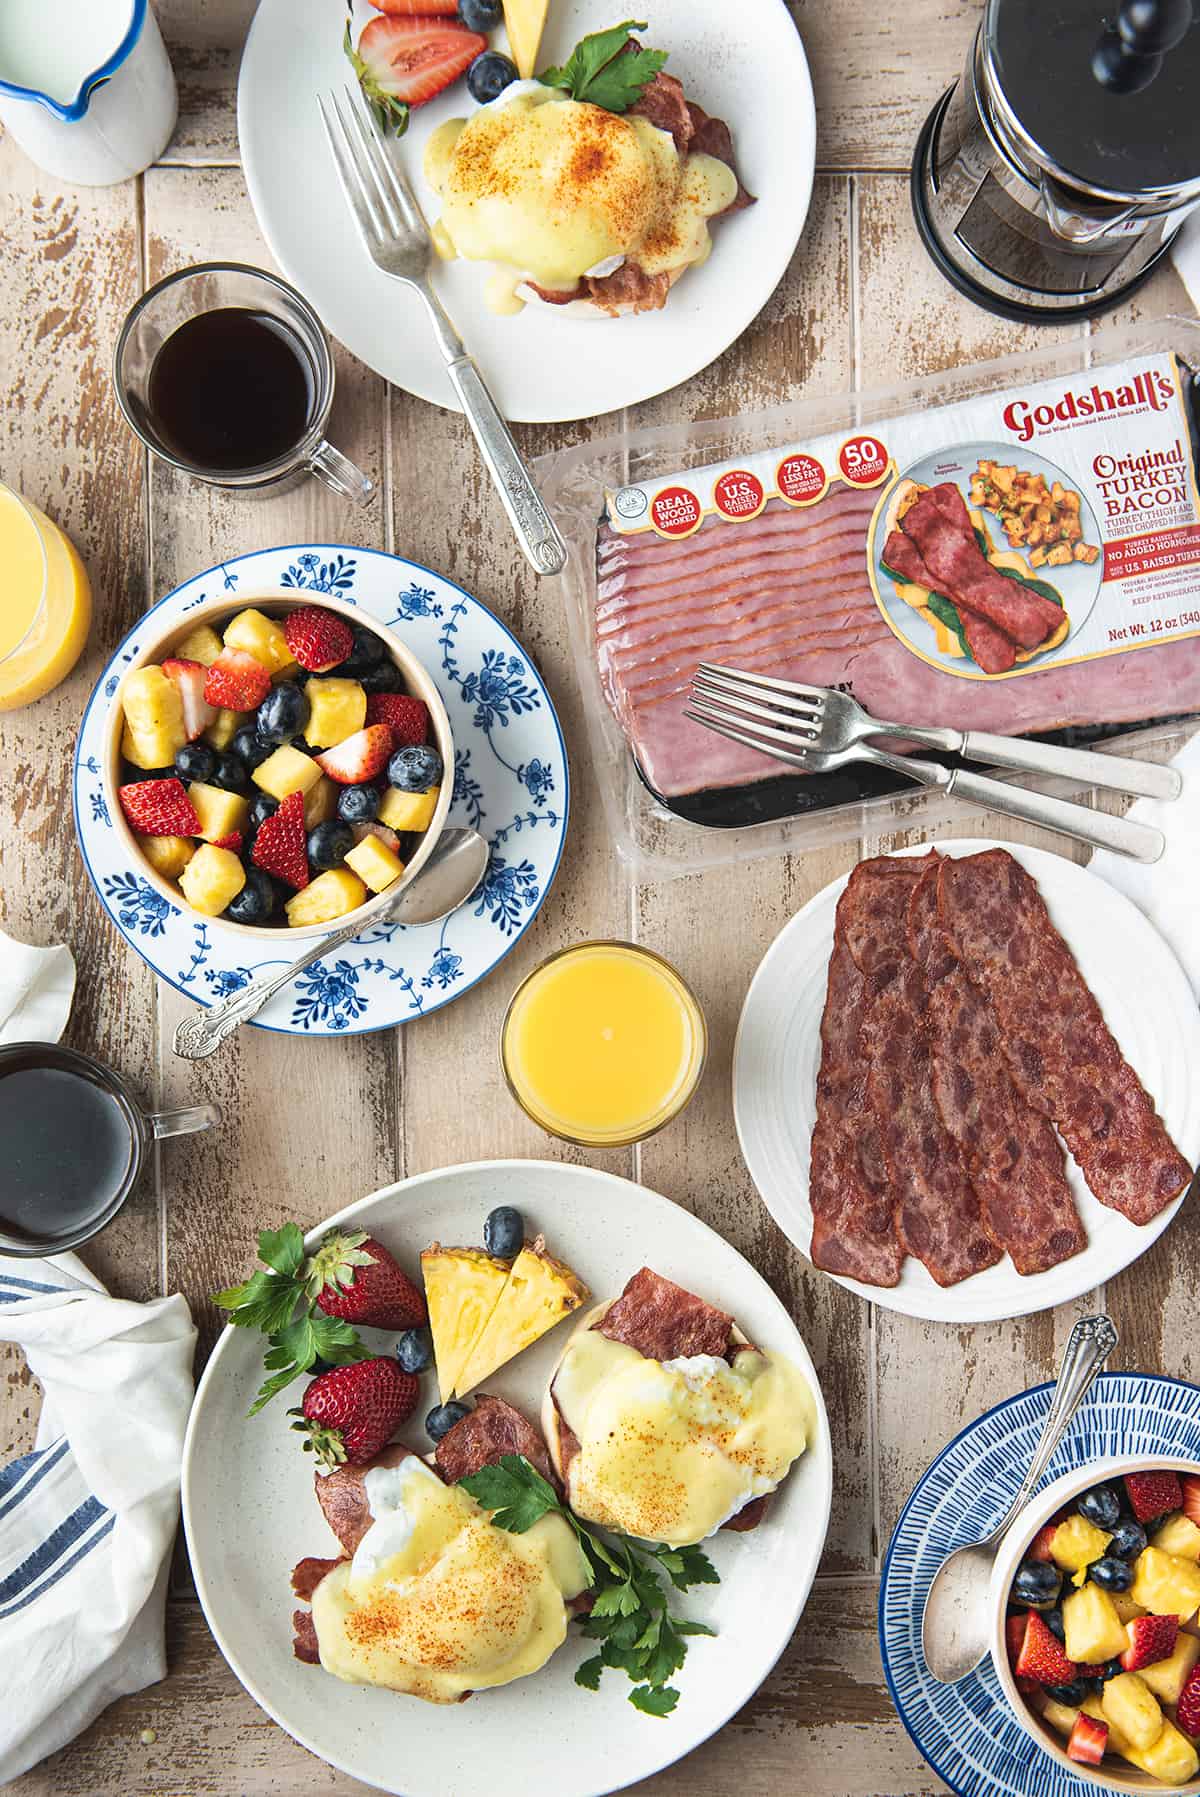 breakfast spread on wooden table with plates of eggs Benedict, bacon, bowls of fruit, and orange juice